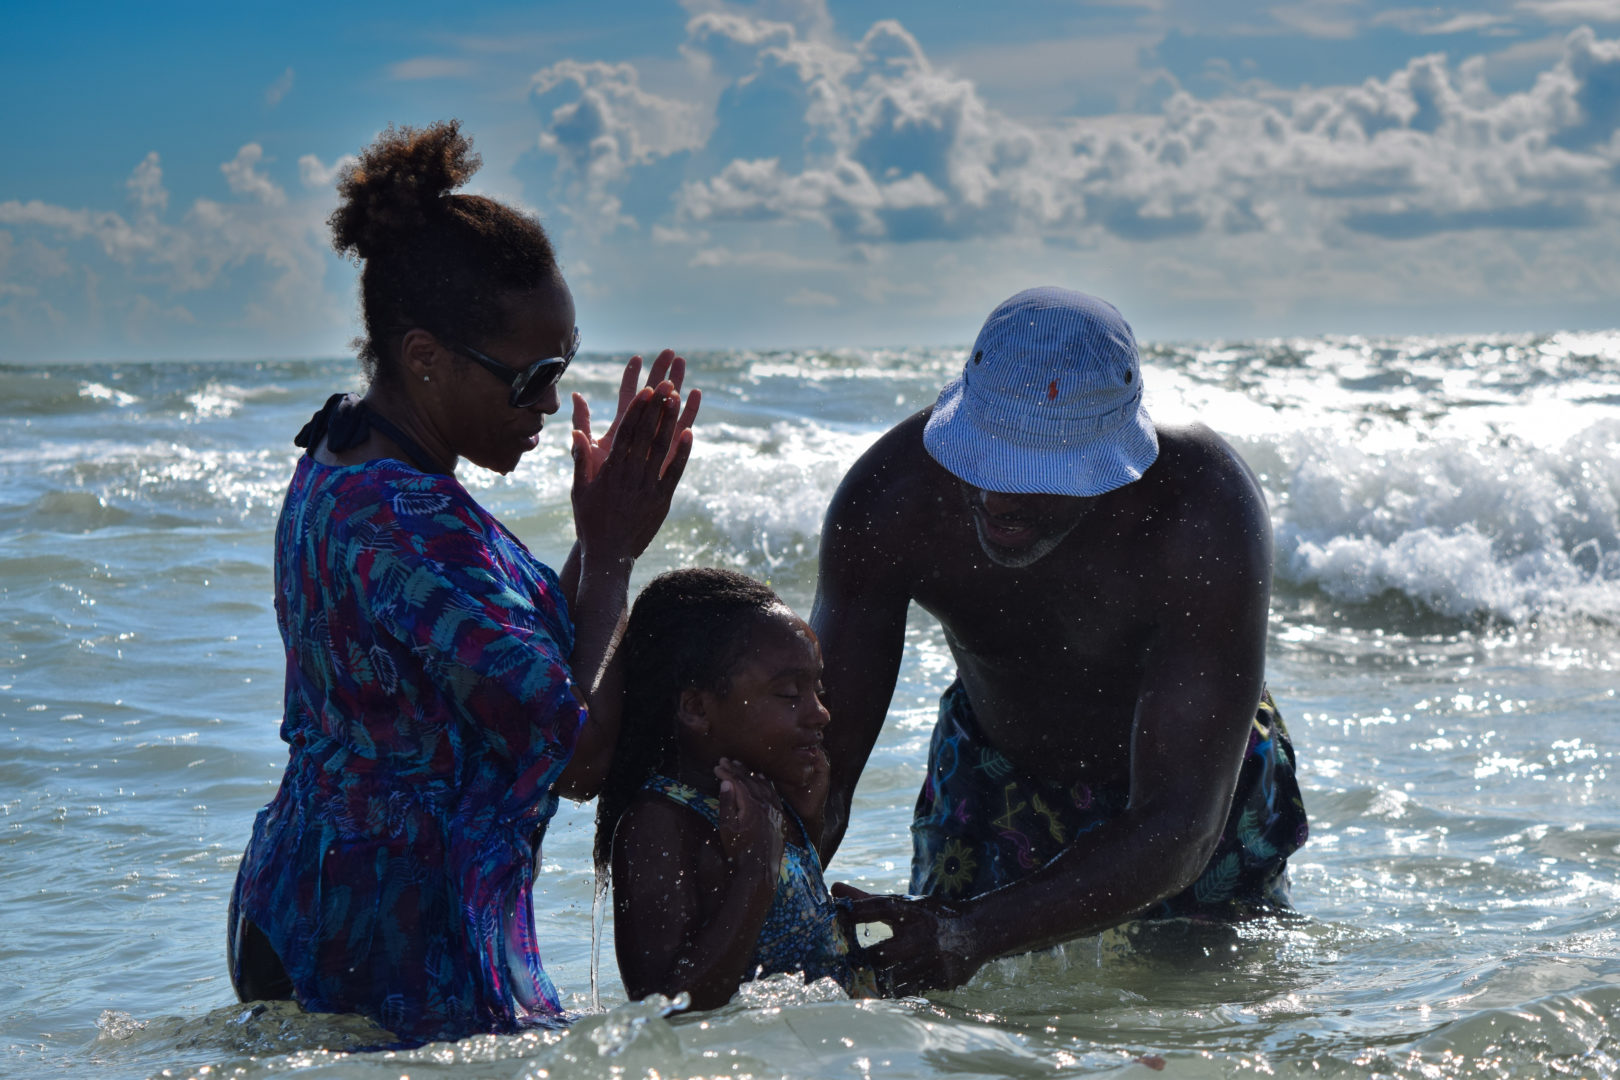 The Harbor Church in Odessa, FL believes in baptism through immersion.